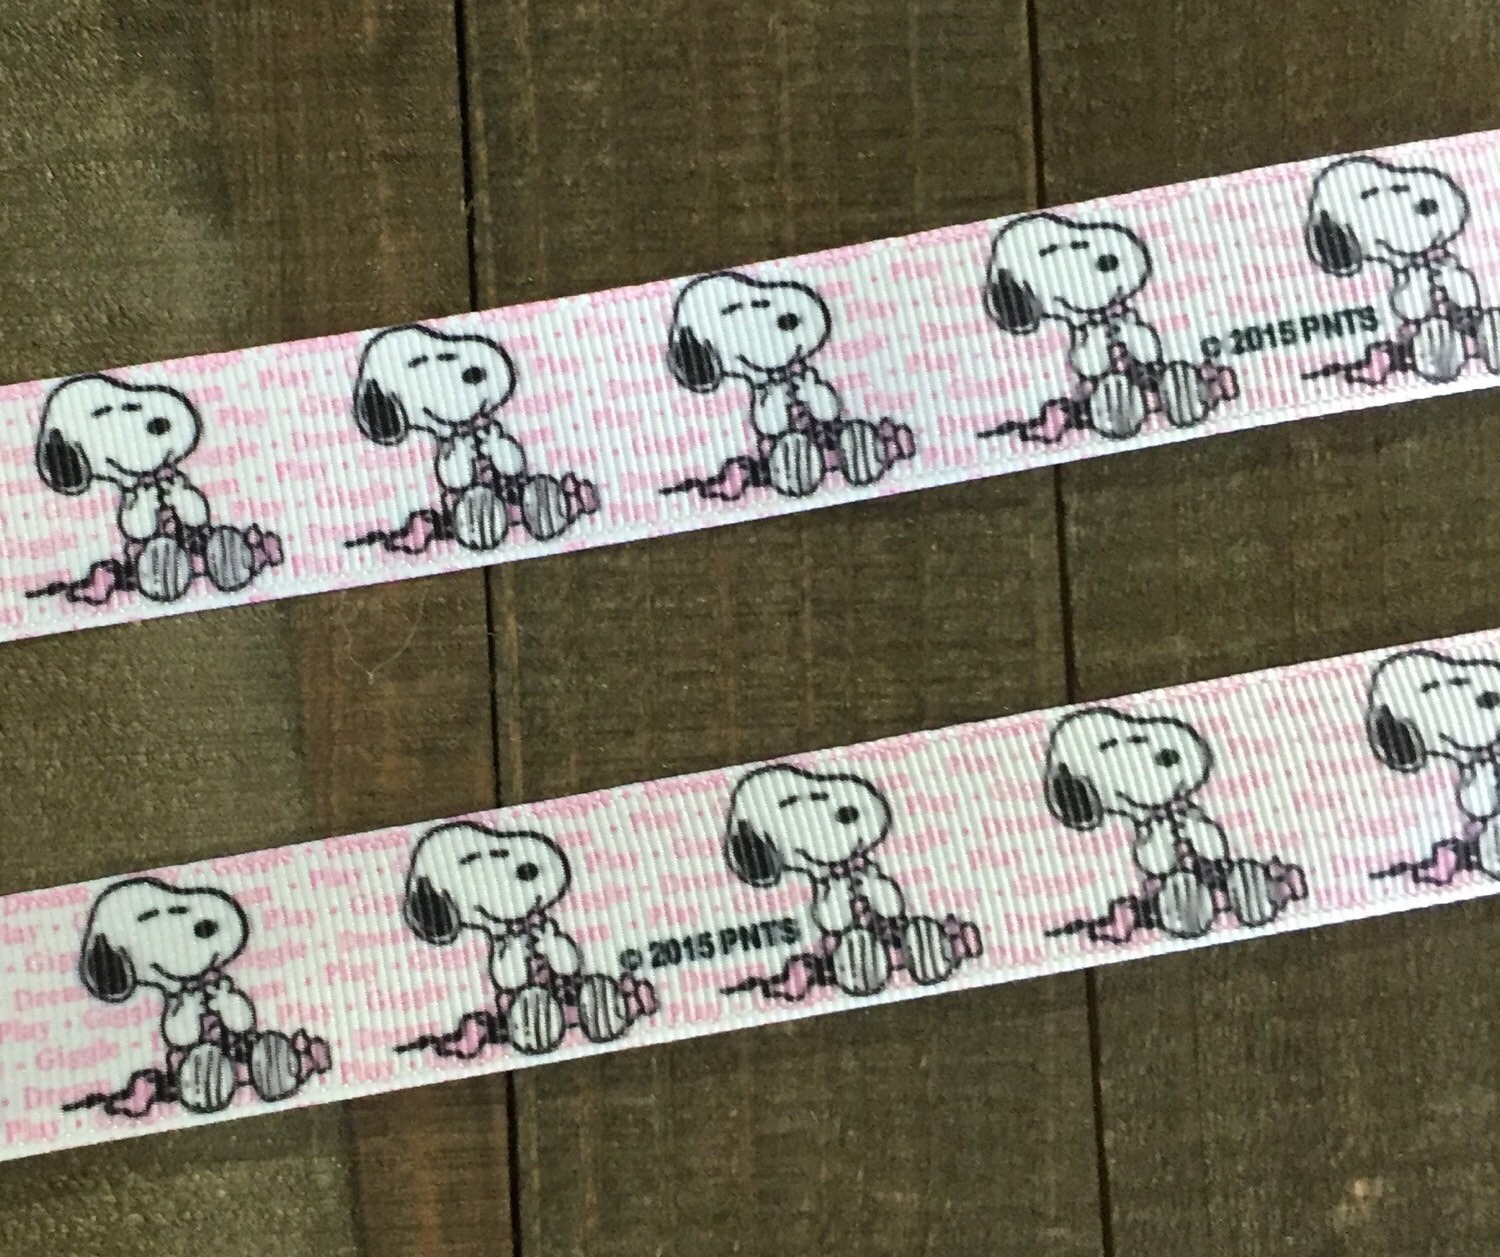 Snoopy Ribbon Charlie Brown Ribbon by EmziesSupply on Etsy